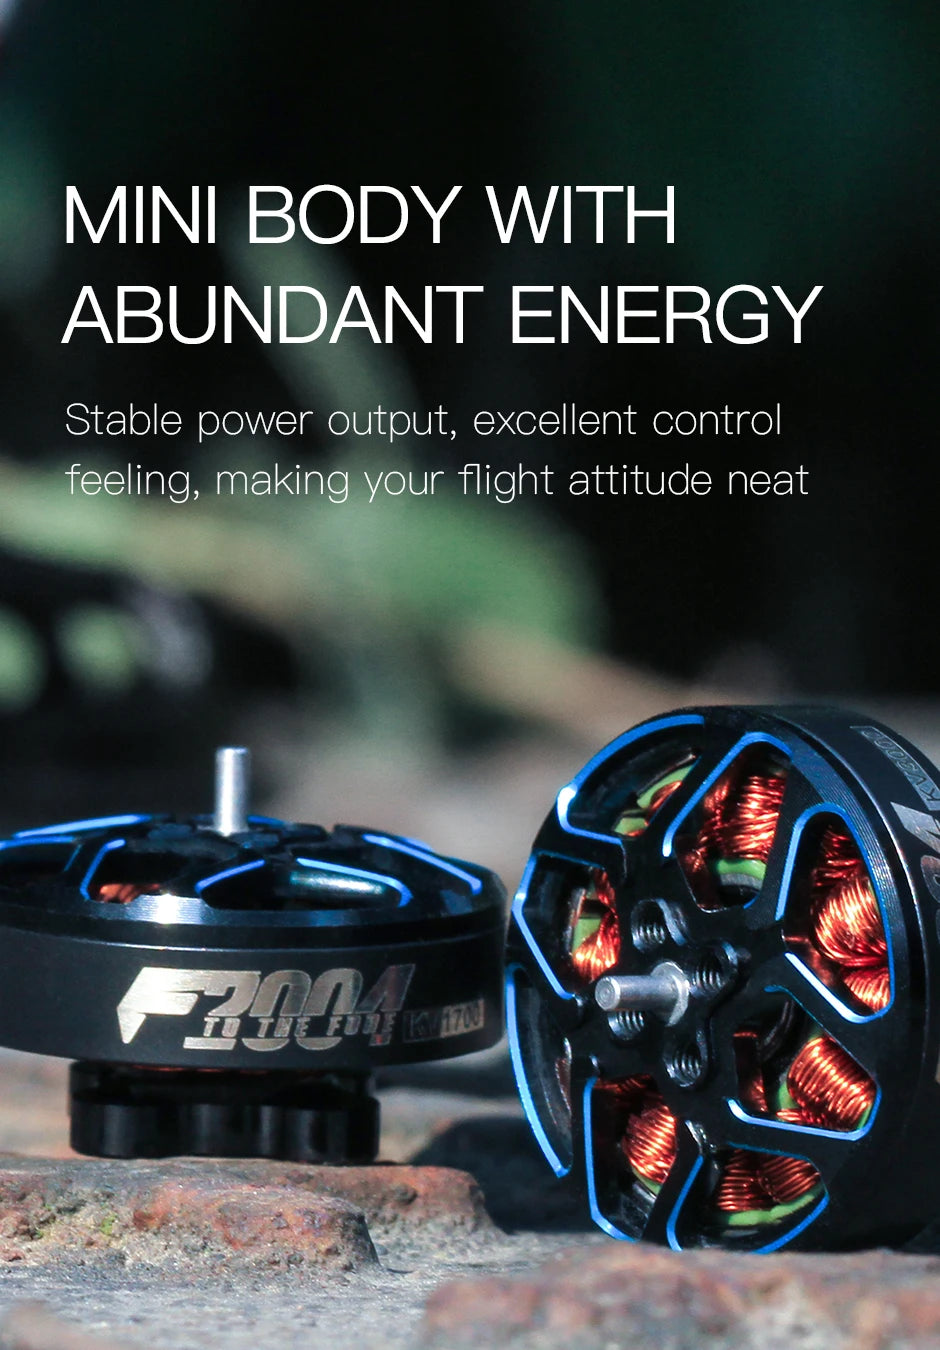 T-motor, MINI BODY WITH ABUNDANT ENERGY Stable power output, excellent control